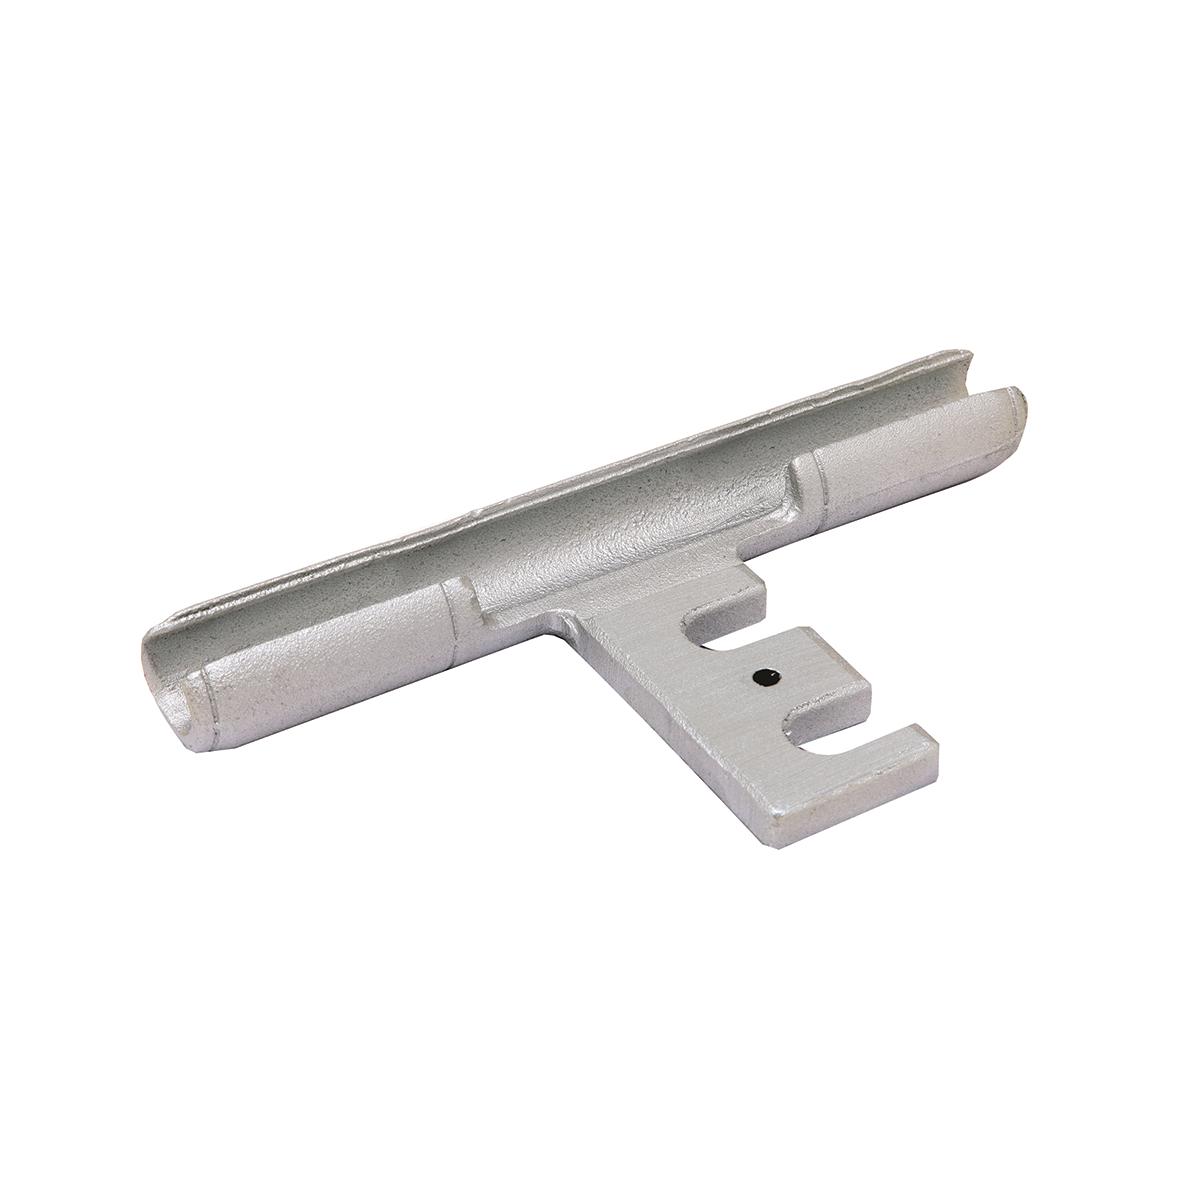 Hubbell YTA391A2N AL primary T-tap connector with slotted tap pad designed for easy disconnecting of tap conductor, For use with Types YKA-R-2N and YKA-A-2N, 18.06 IN L. 